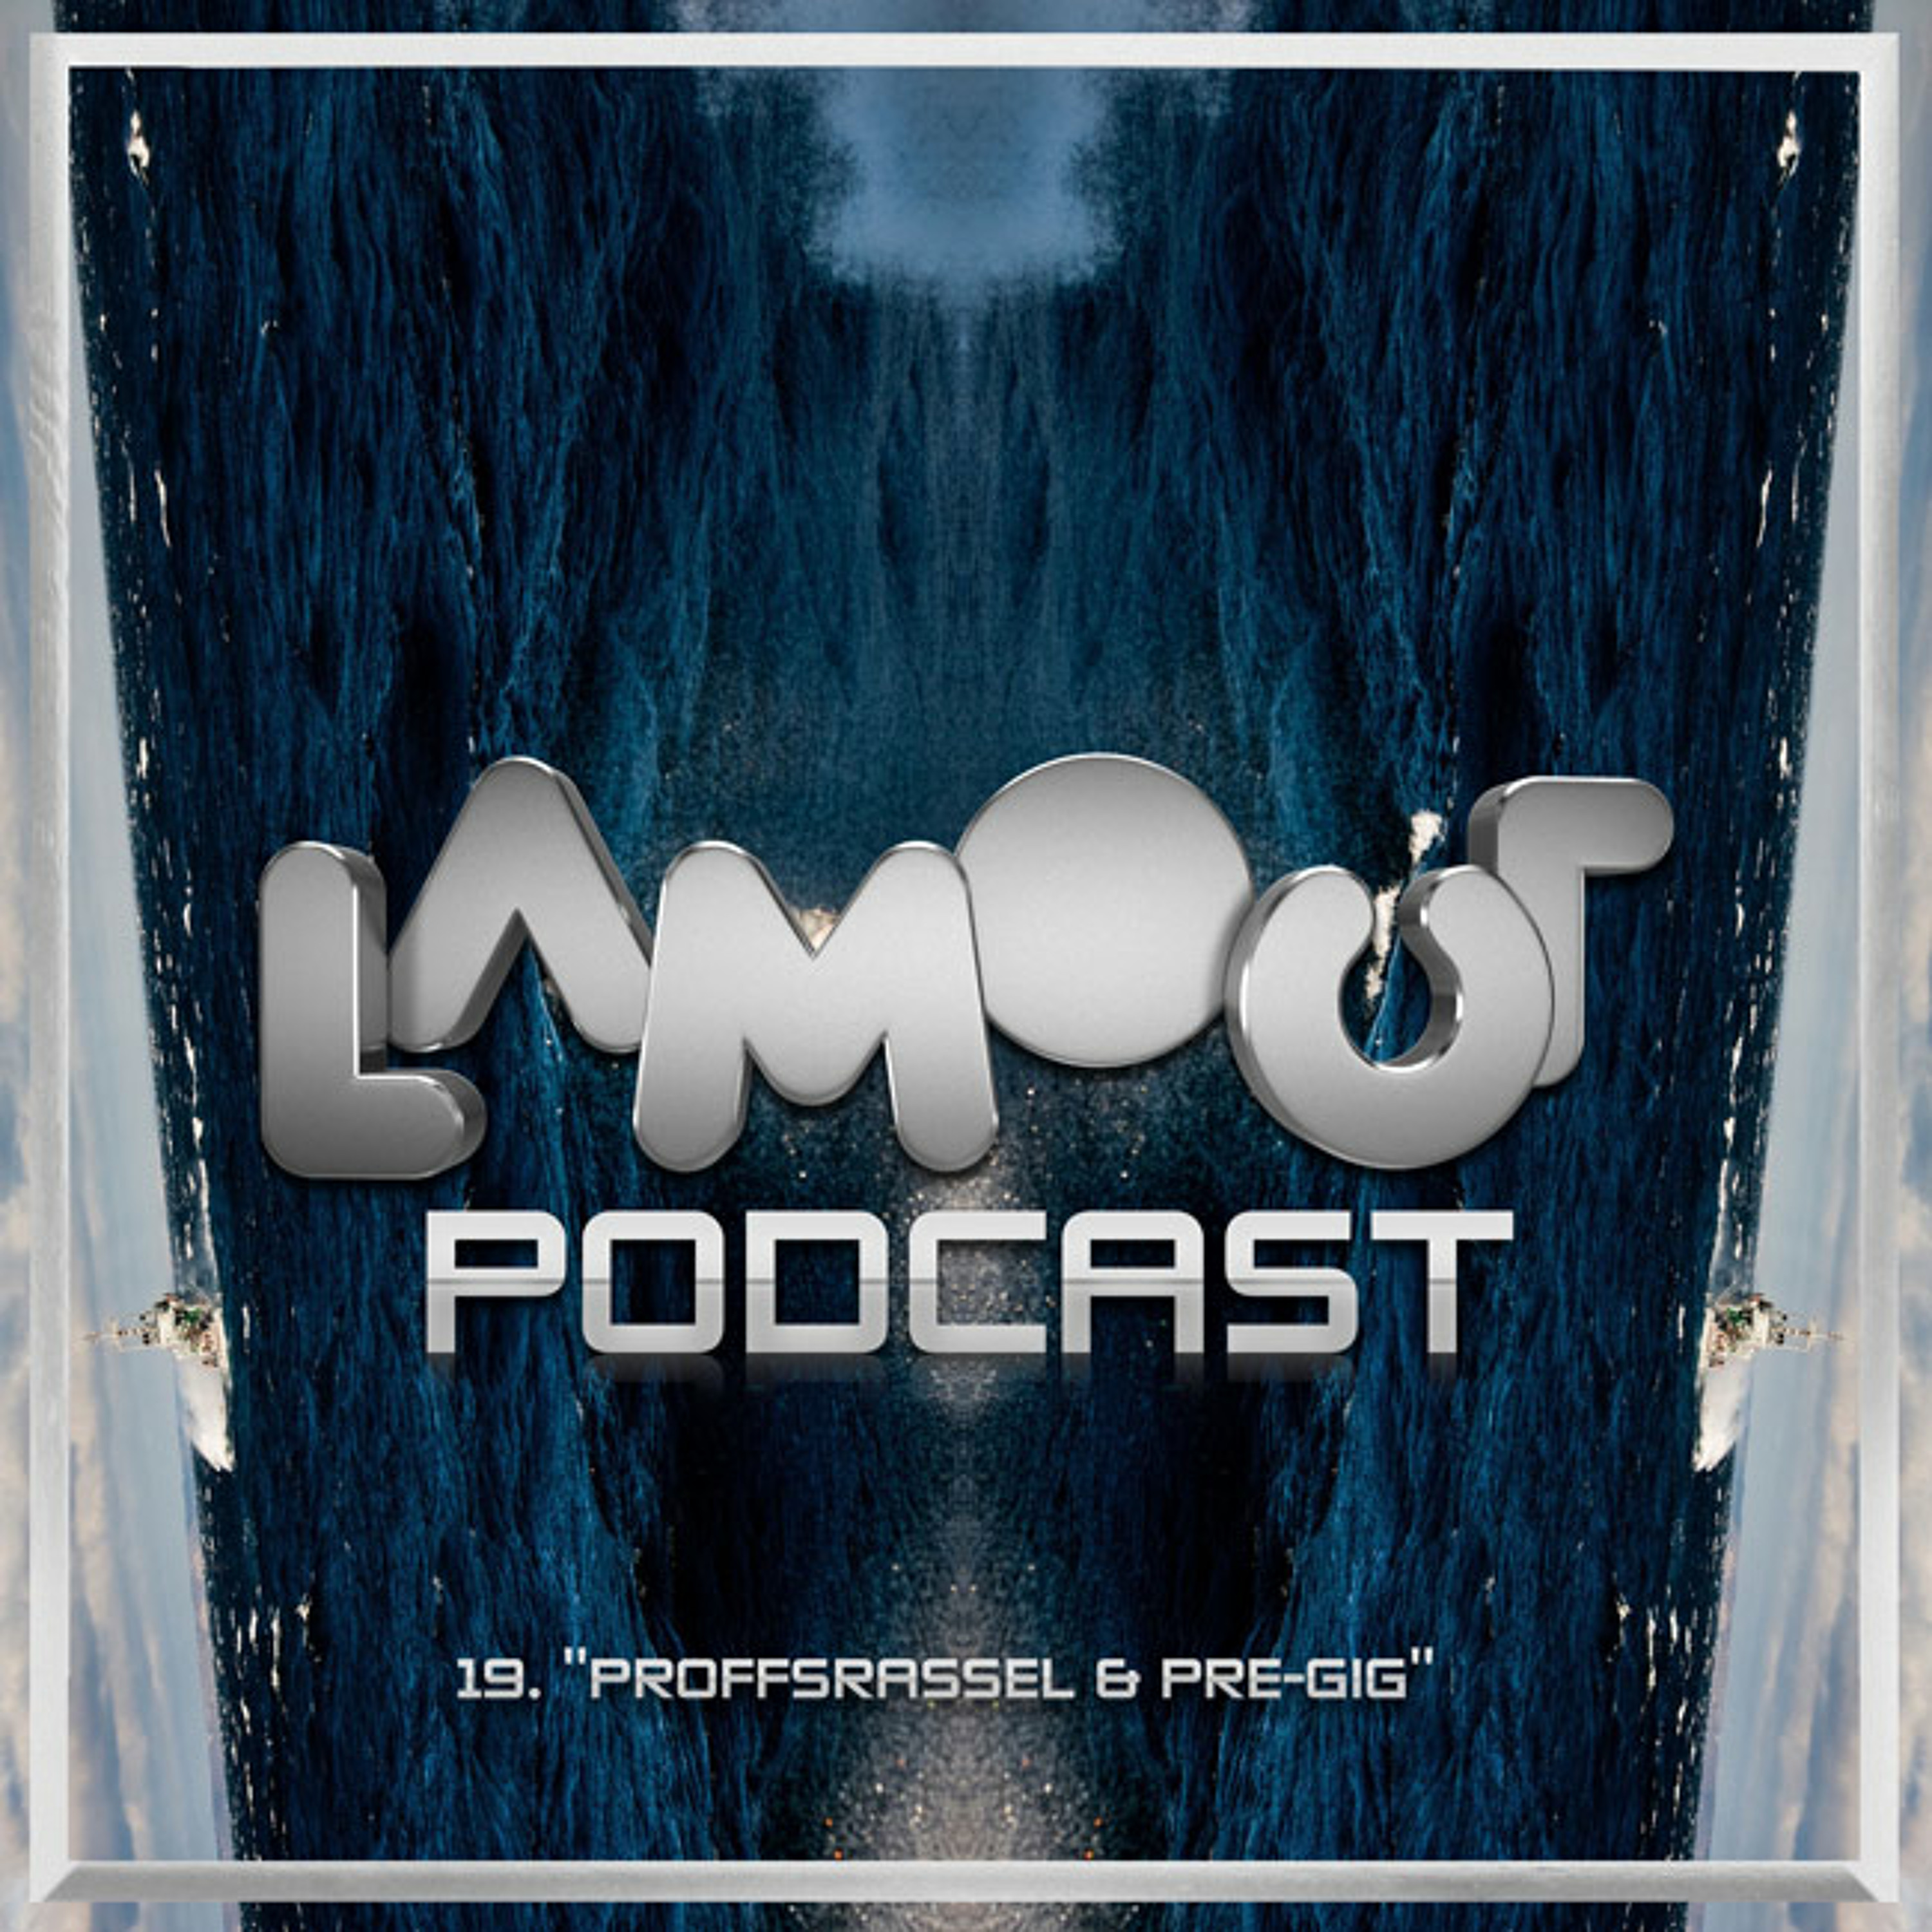 Lamour Podcast #19 - Proffsrassel & pre-gig